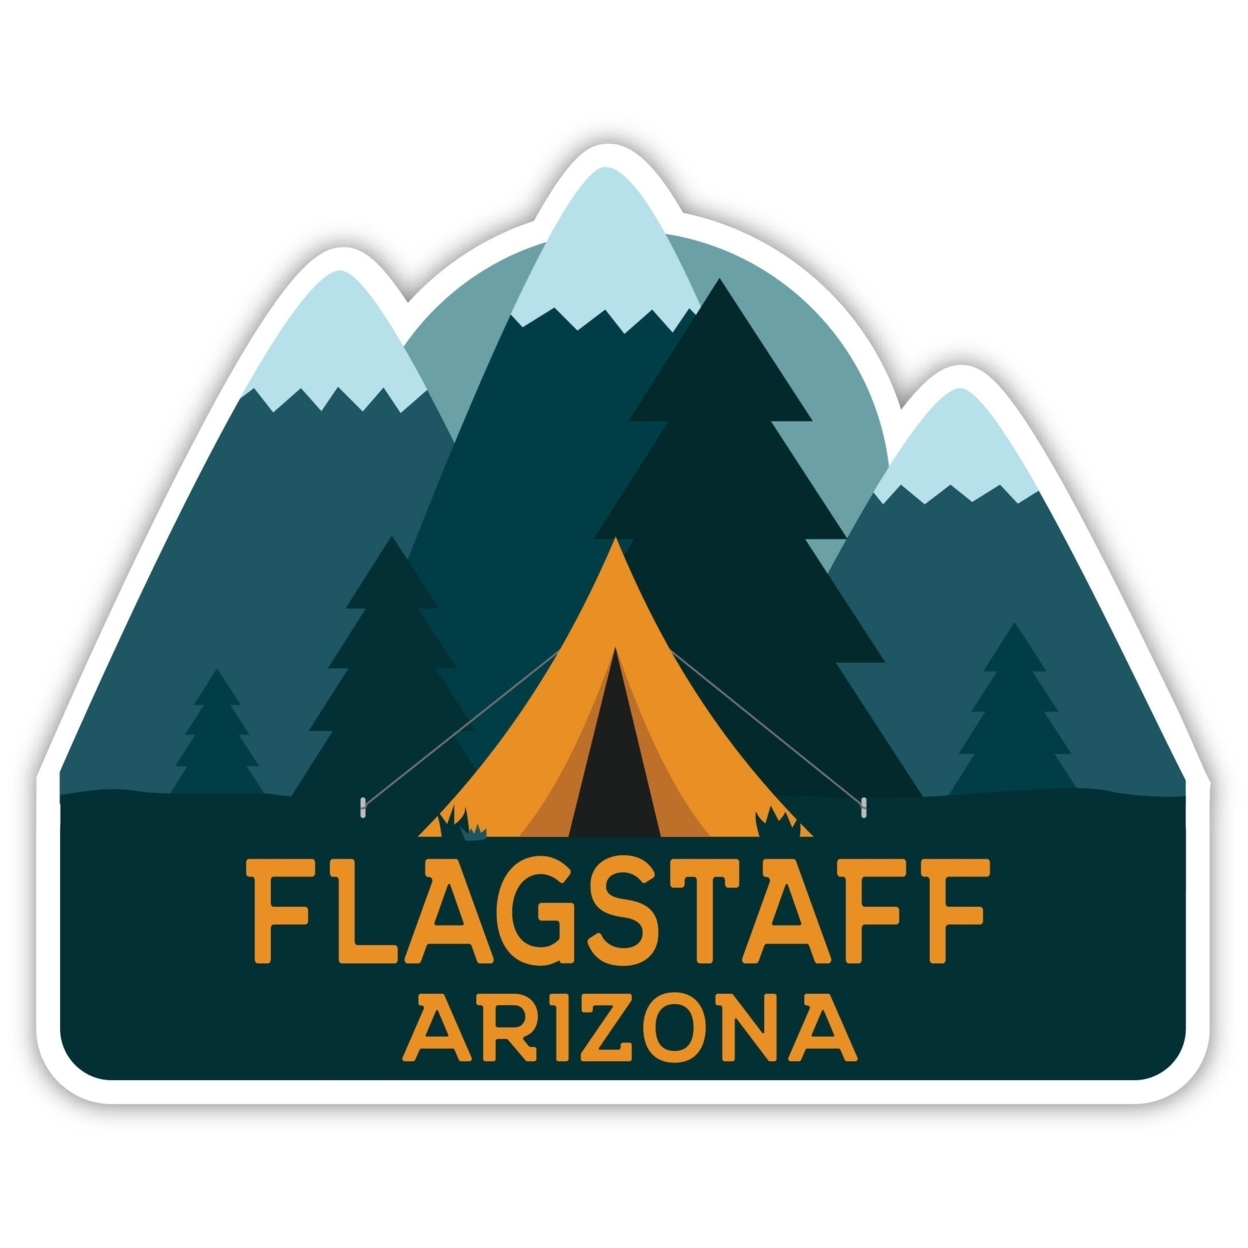 Flagstaff Arizona Souvenir Decorative Stickers (Choose Theme And Size) - 4-Pack, 8-Inch, Tent